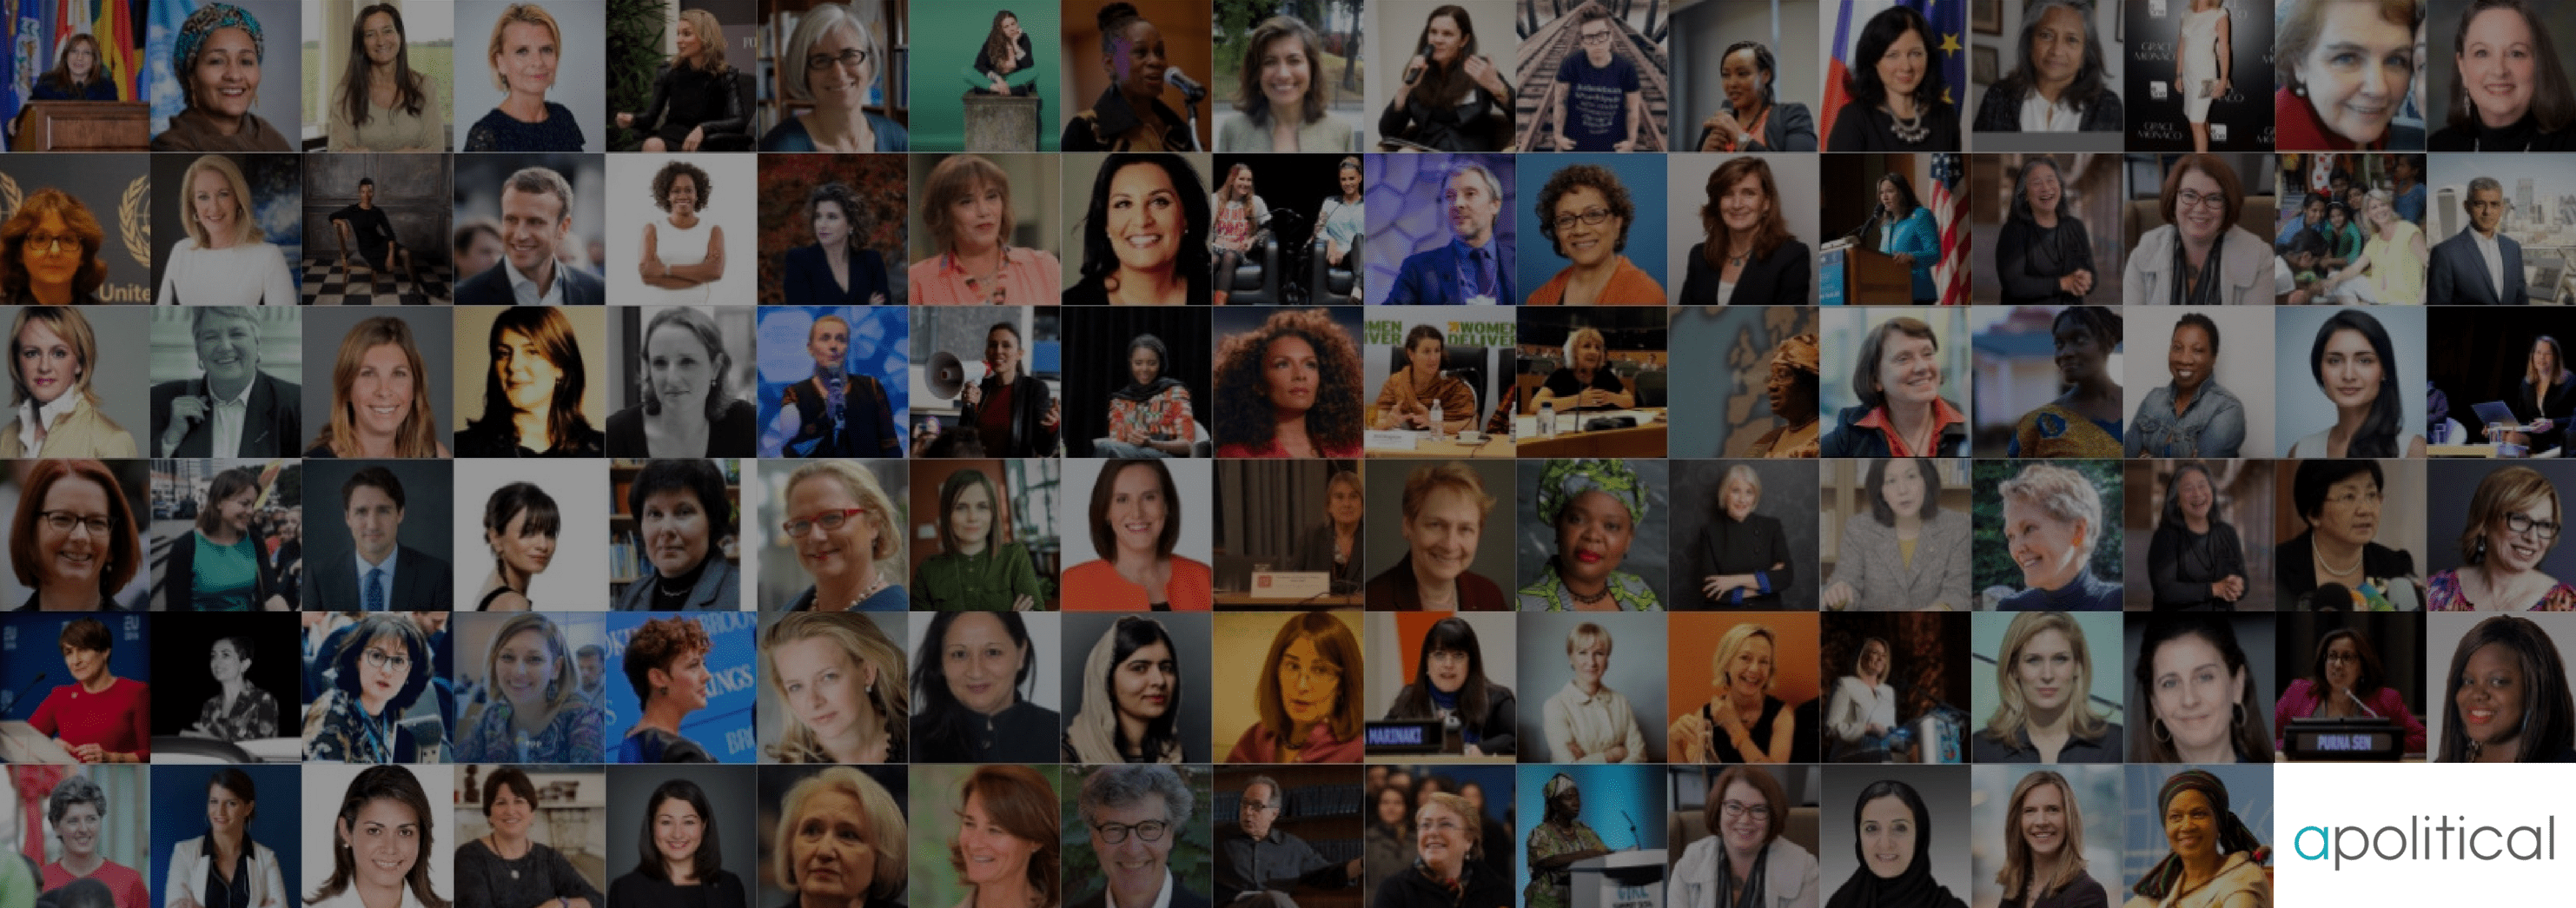 Gender Equality Top 100 The Most Influential People In Global